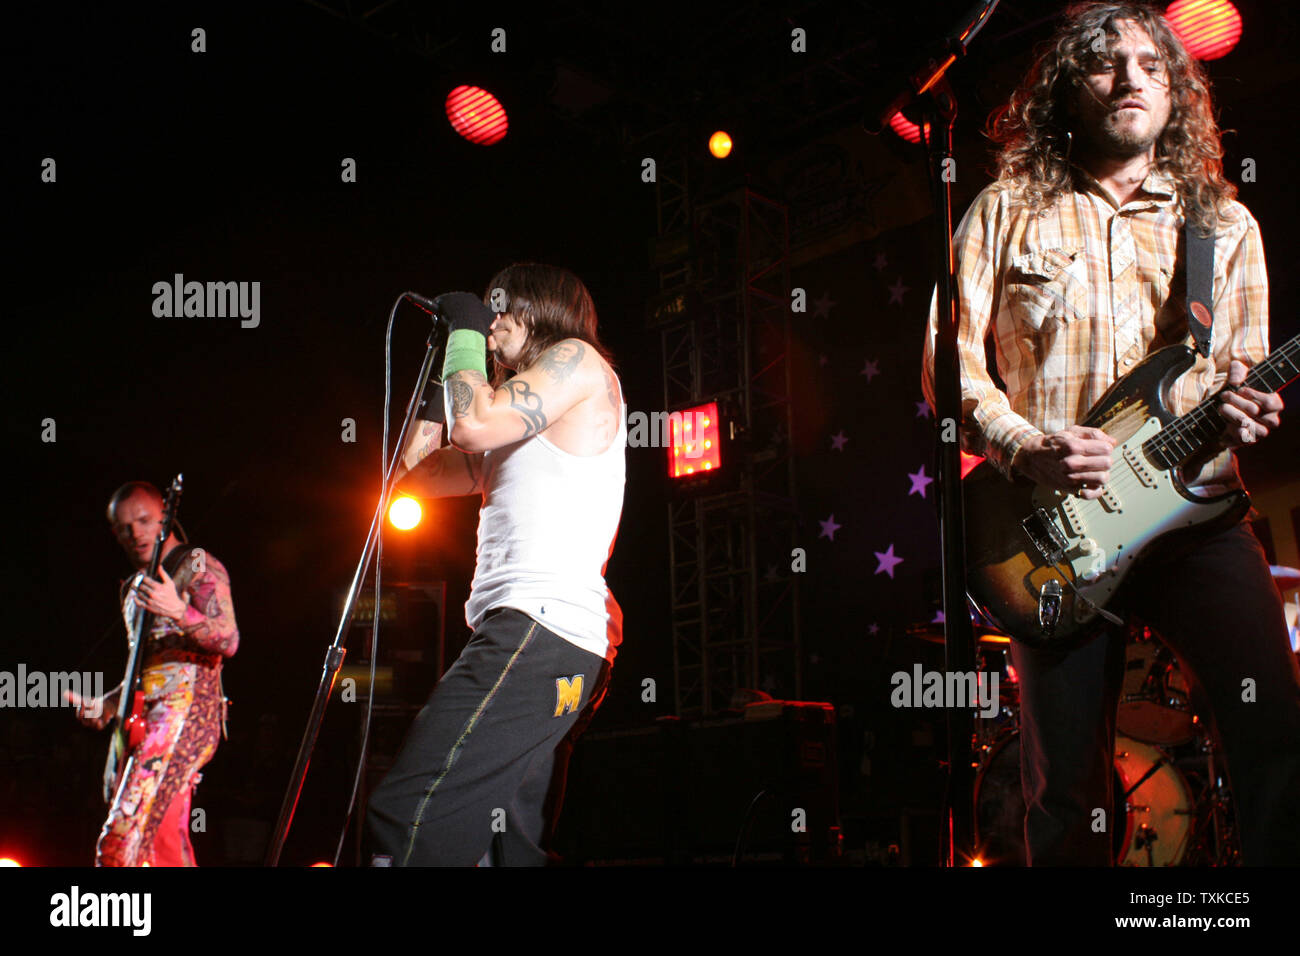 The Red Hot Chili Peppers guitarist Flea (l) lead singer Anthony Kiedis (c) and guitarist John Frusciante (l) perform at the NASCAR NEXTEL Challenge at Lowe's Motor Speedway in Charlotte, NC on May 20, 2006.  (UPI Photo/Bob Carey) Stock Photo